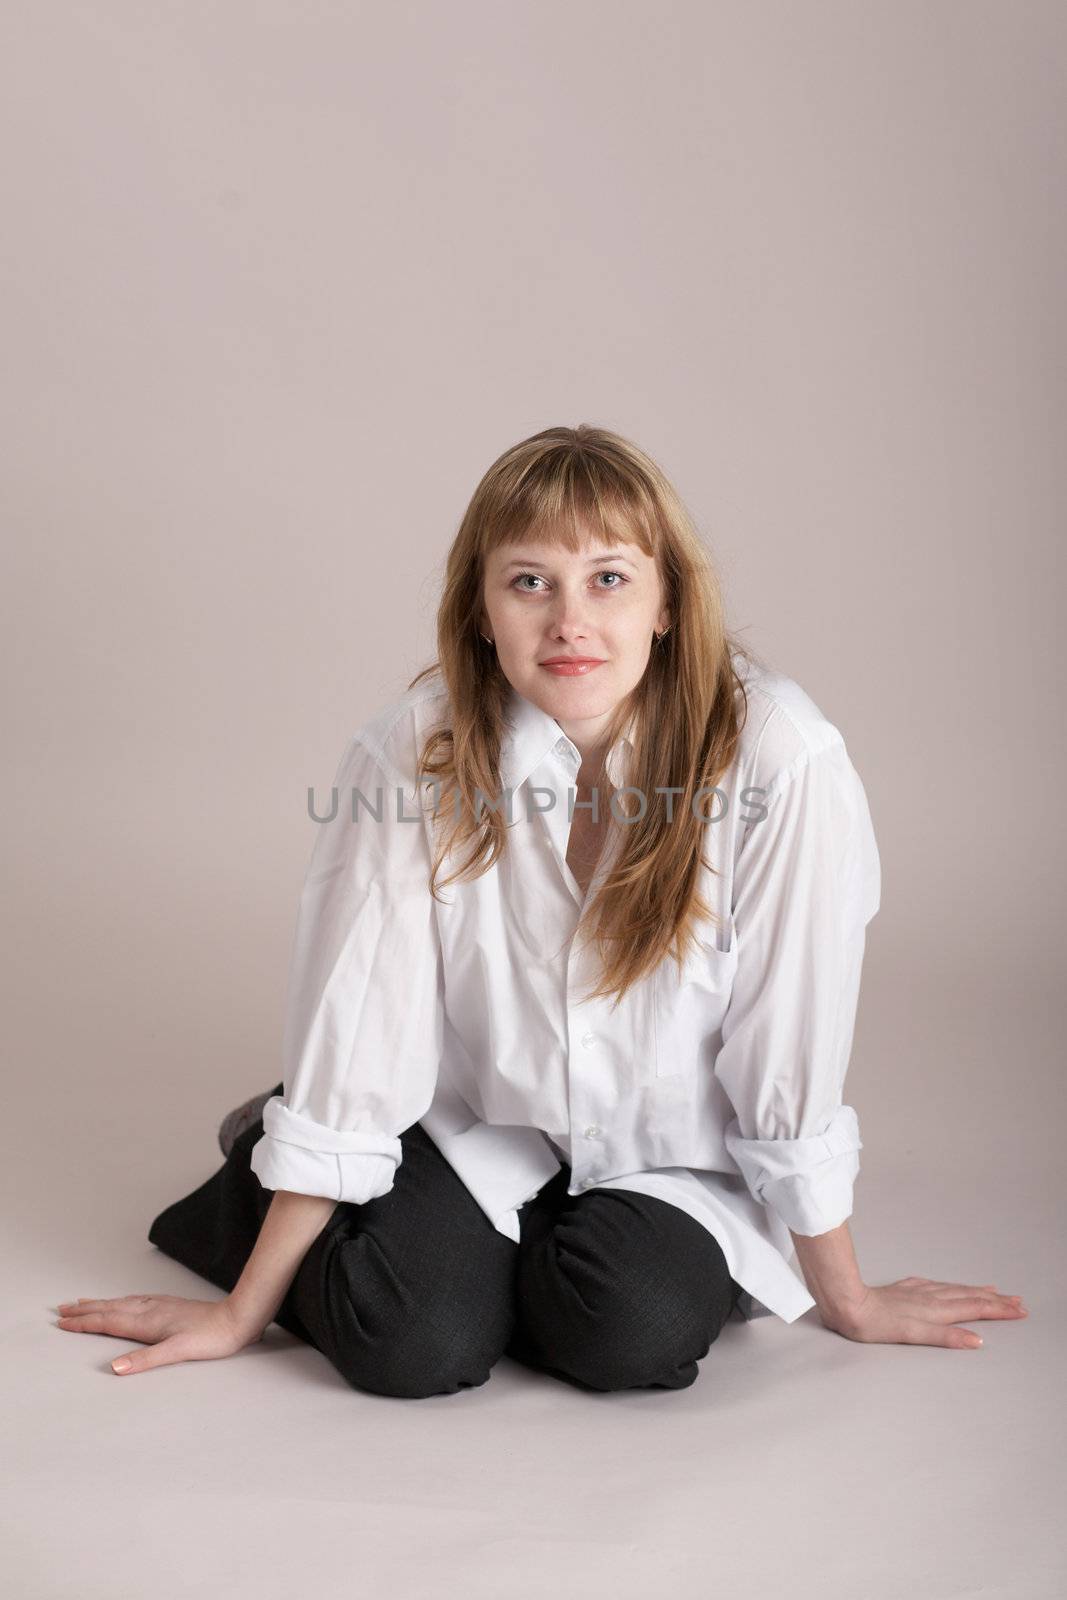 An image of nice woman sitting on neutral background